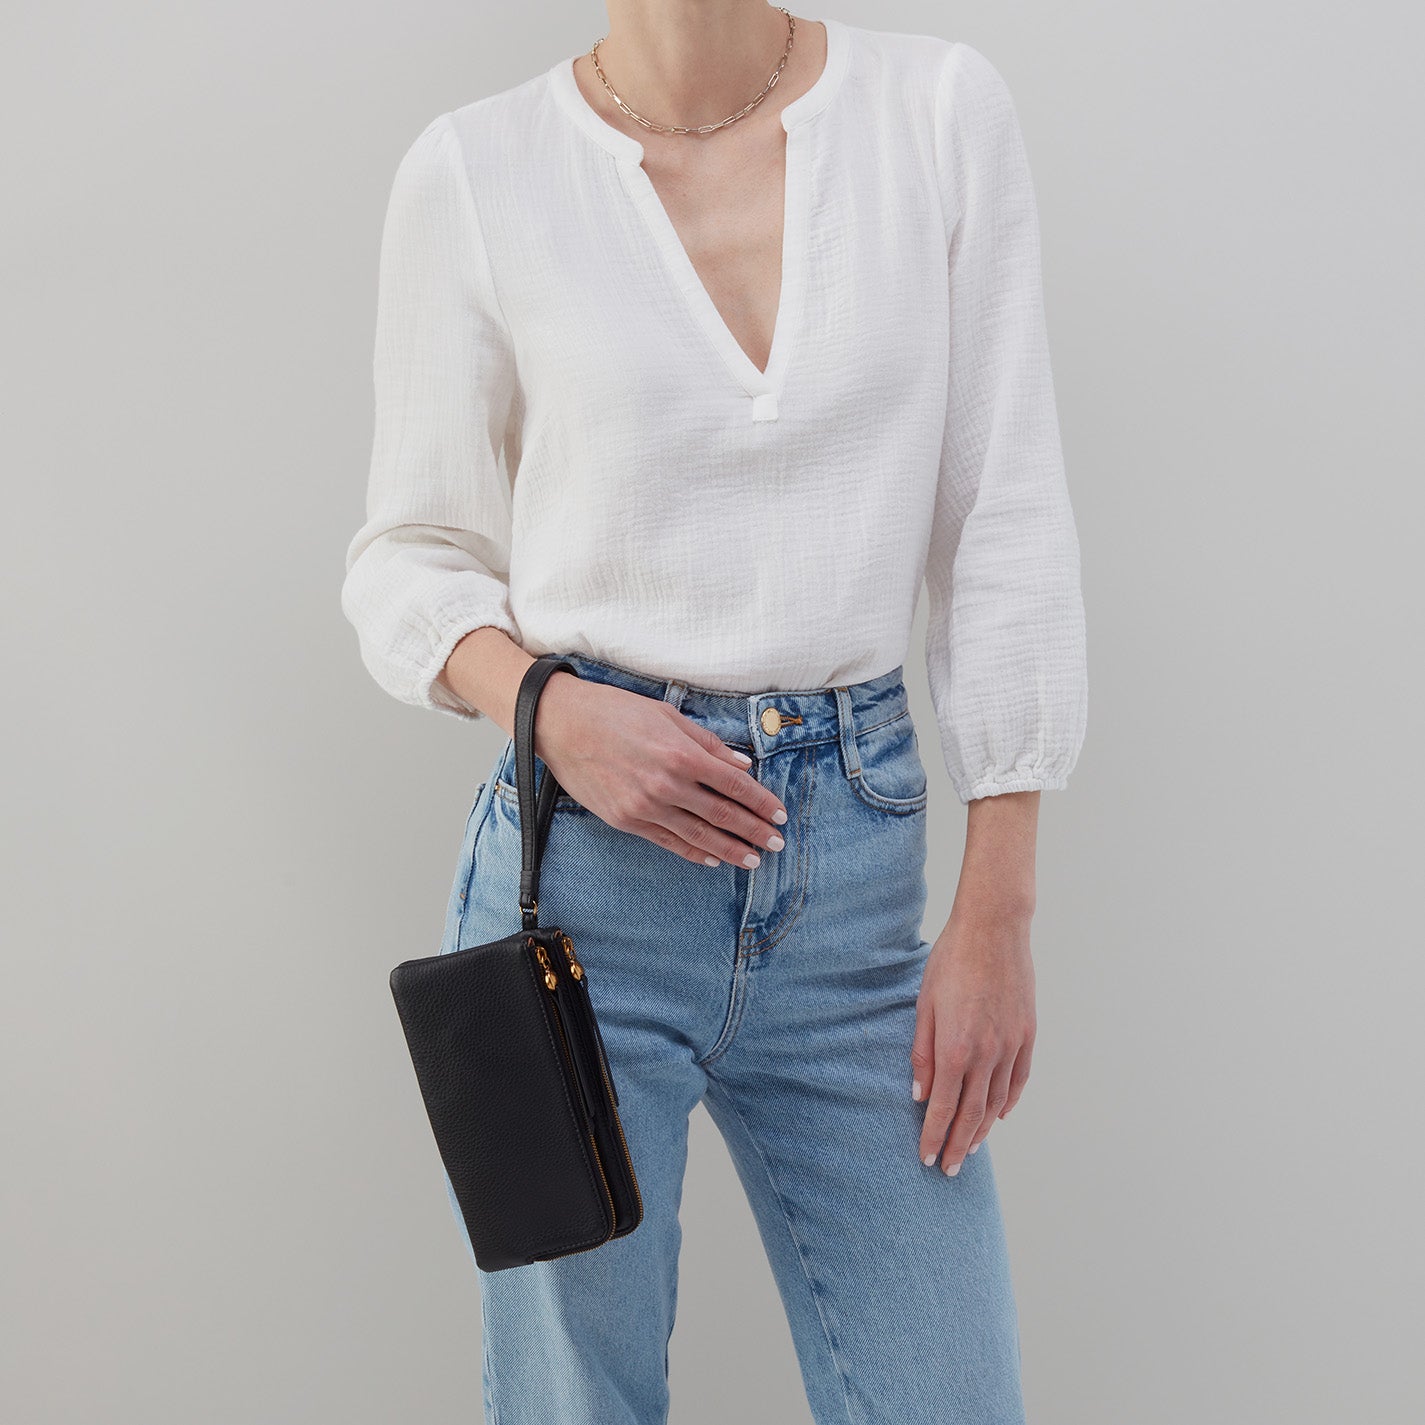 woman wearing white blouse and jeans with black  Dayton Wristlet hanging on her wrist.